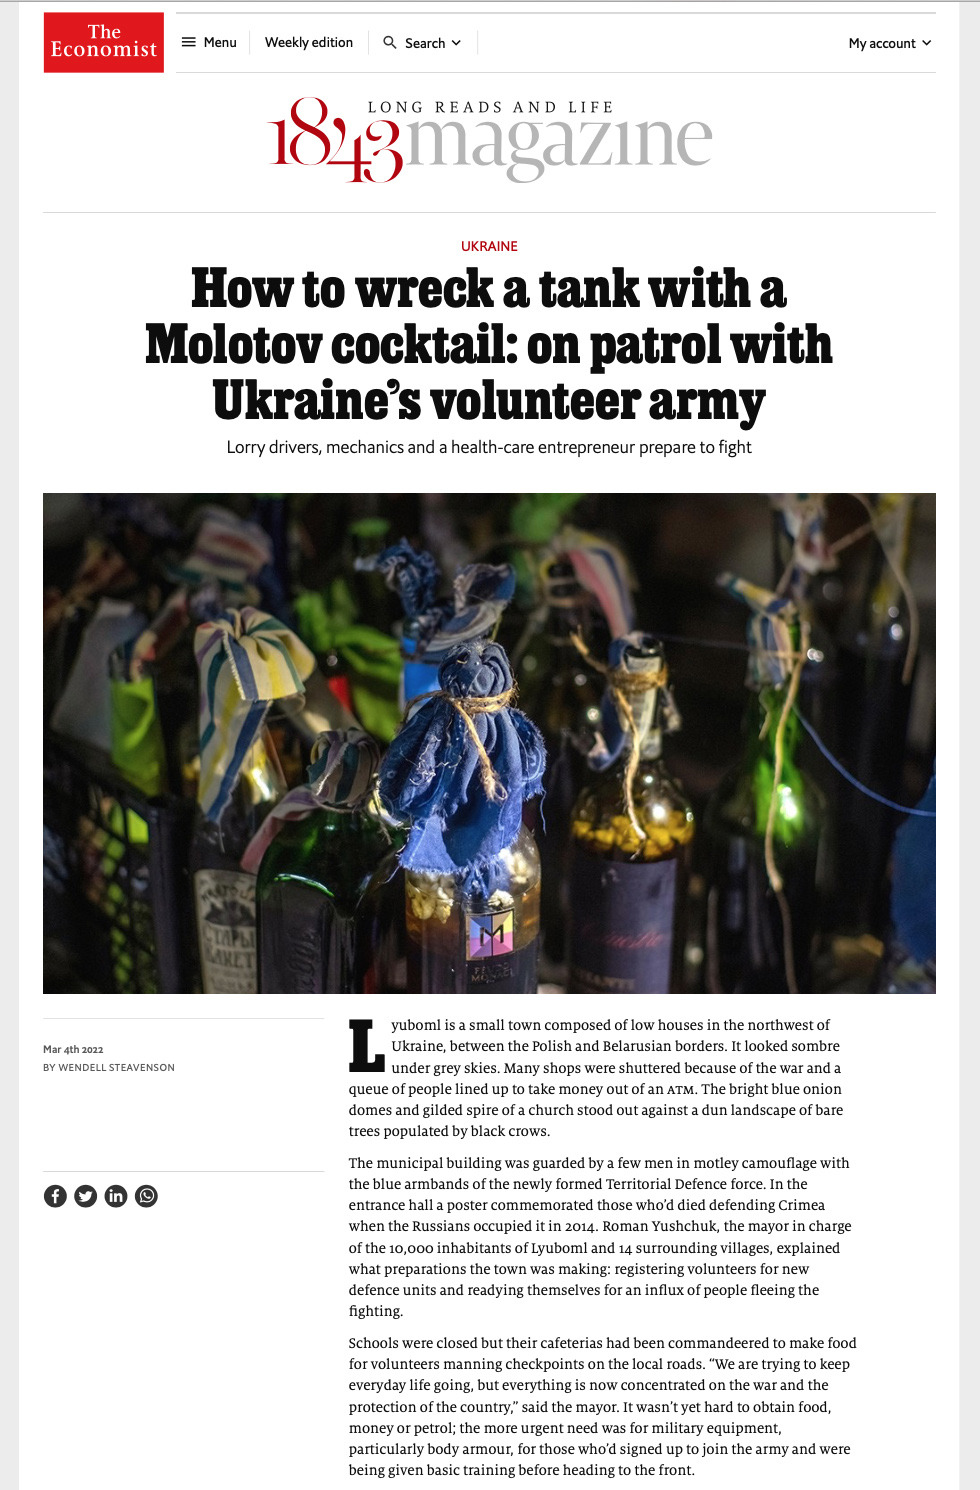 Photos by Ron Haviv / VII of Ukrainians volunteering to make Molotov cocktails during the Russian invasion of Ukraine, in The Economist 1843 Magazine, March 4, 2022.